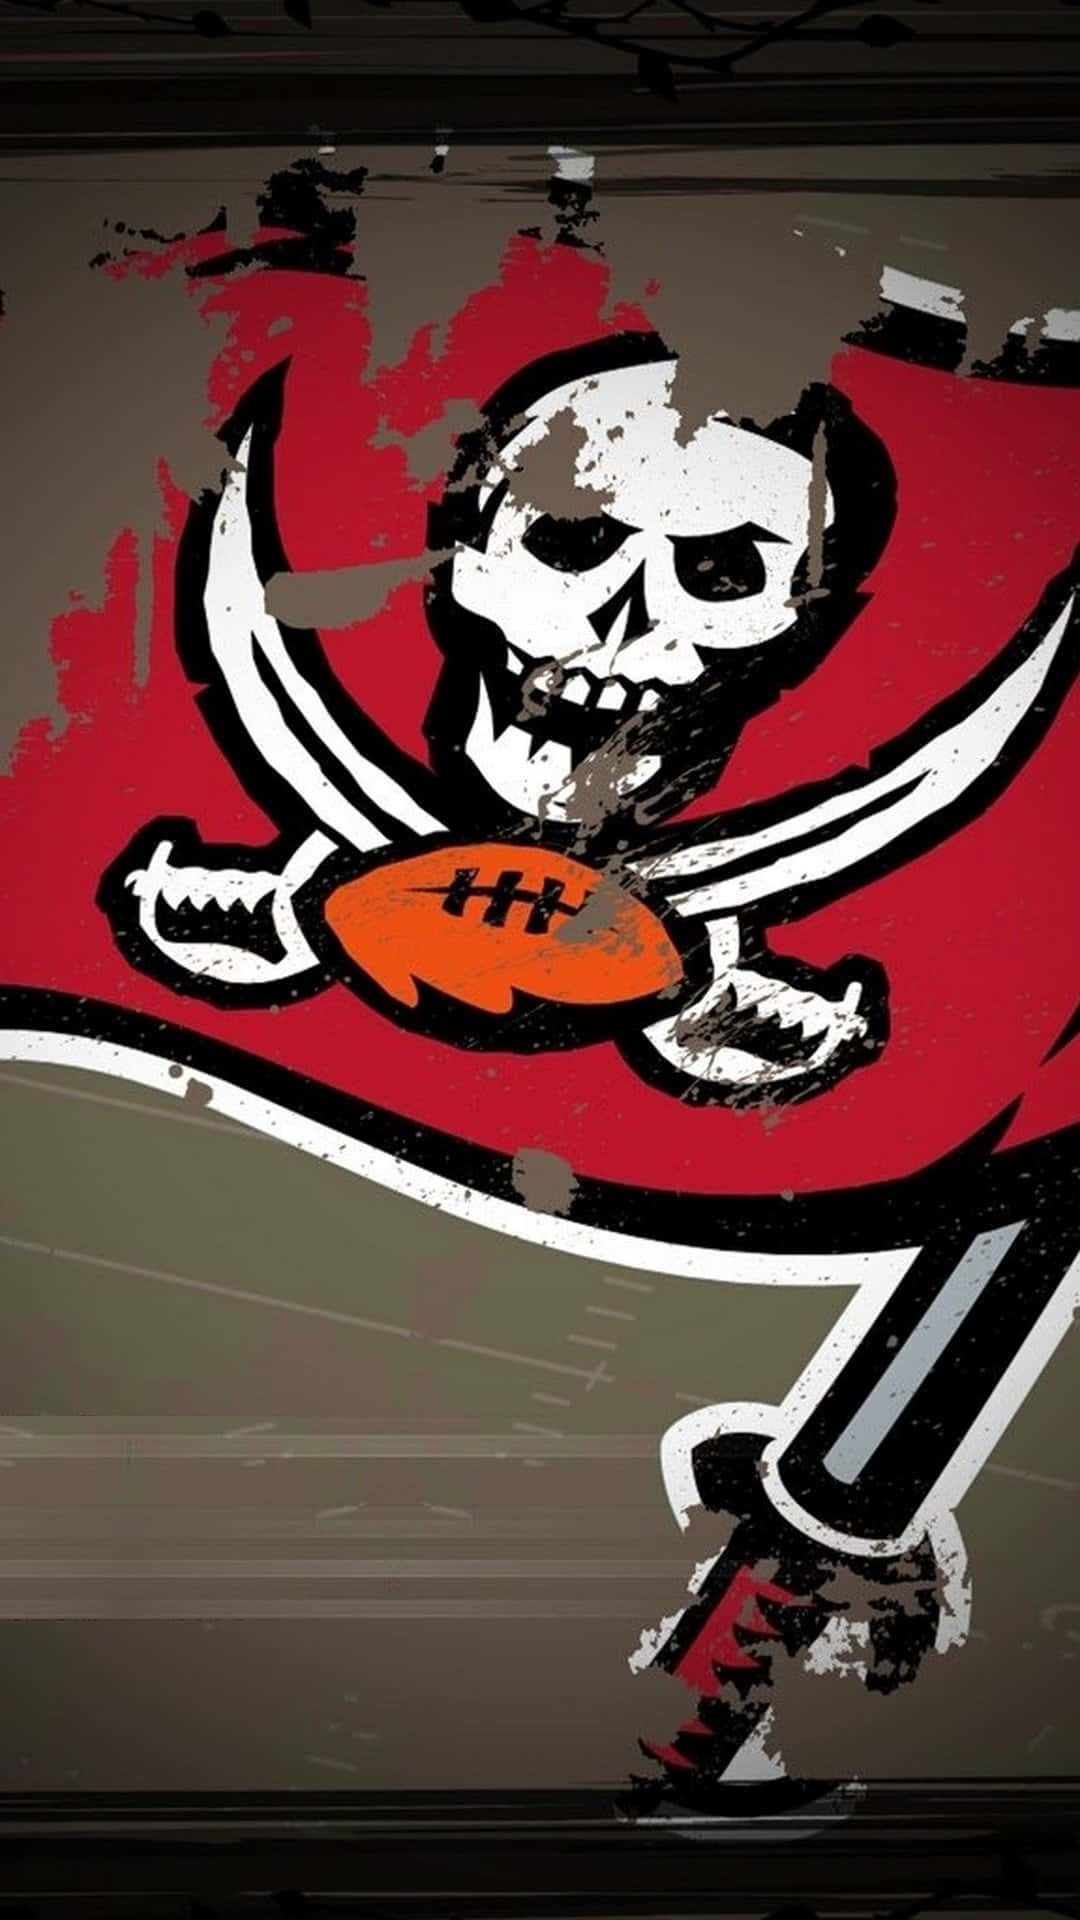 Show your Bucs pride with a Tampa Bay Buccaneers phone wallpaper Wallpaper